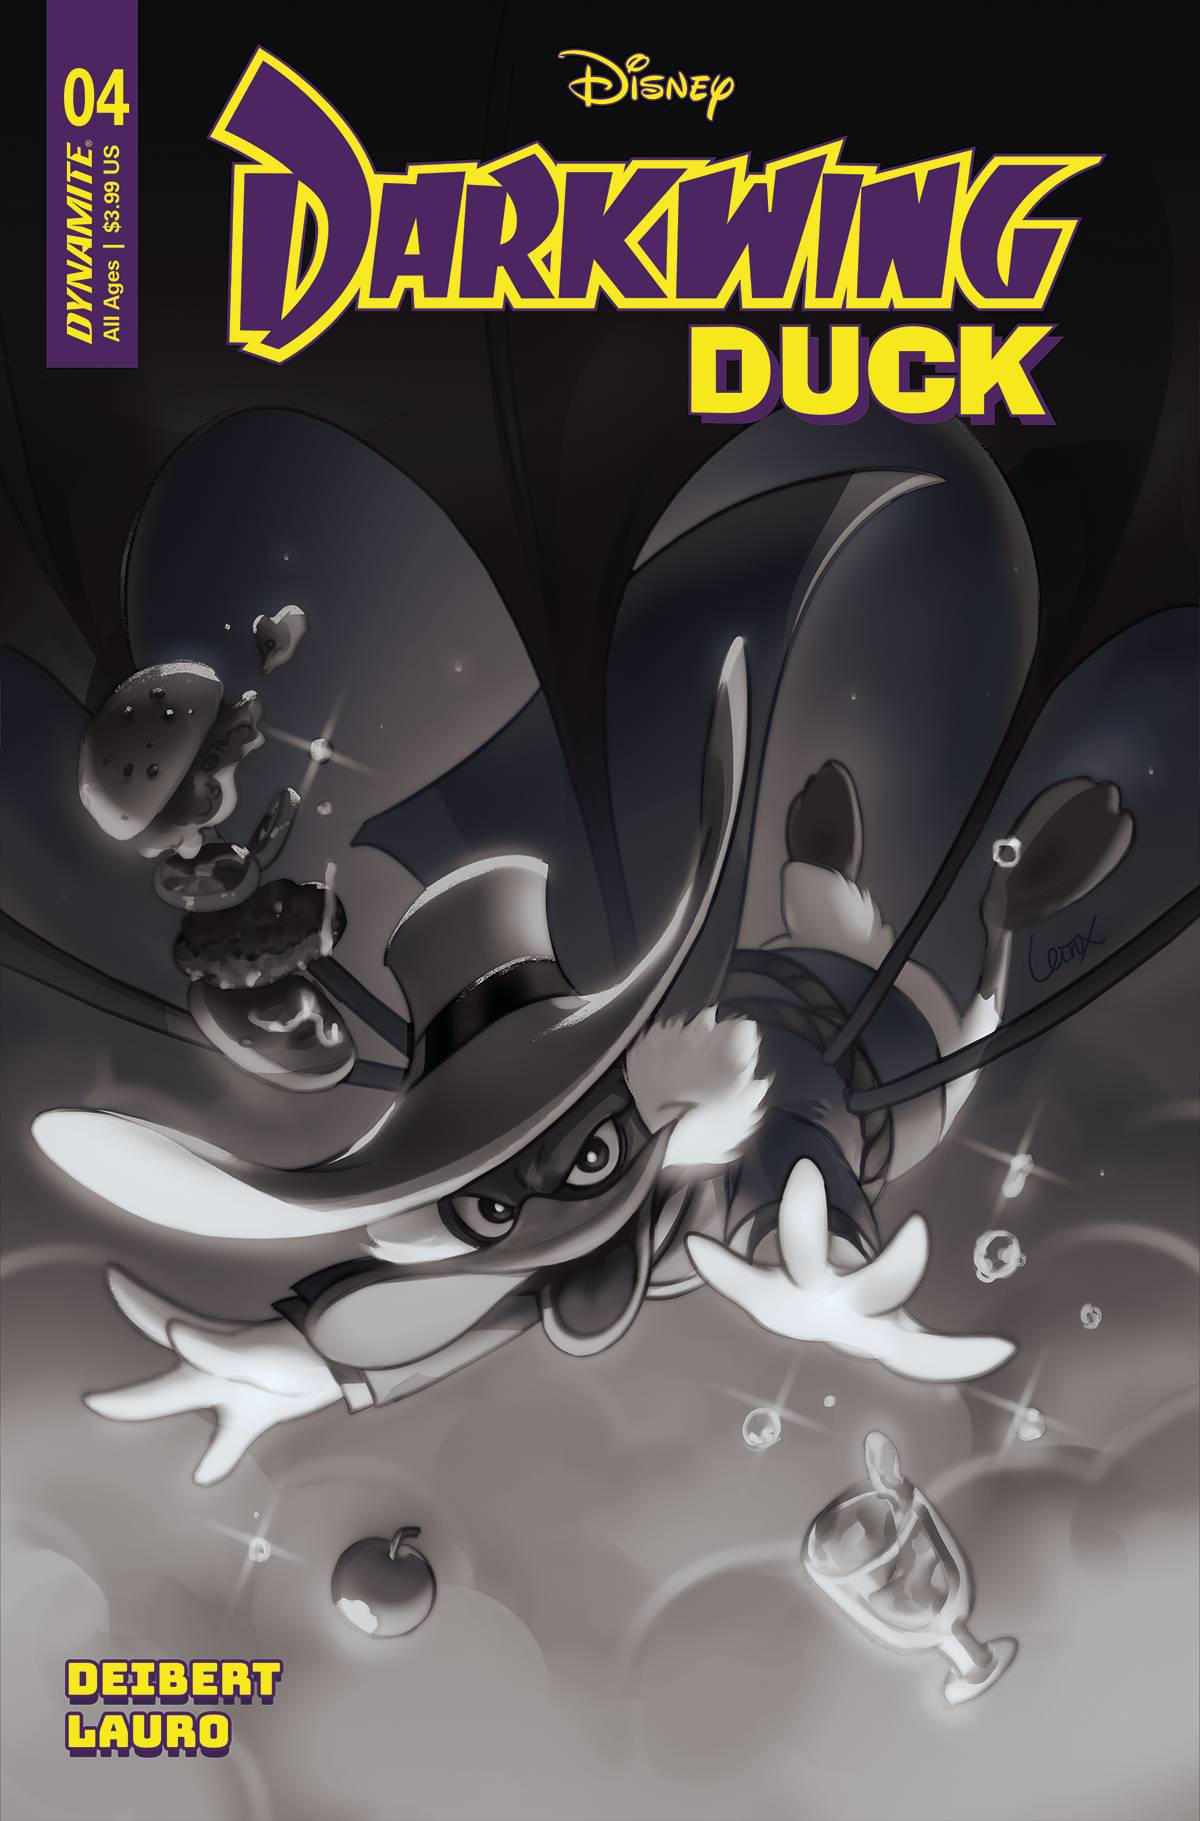 Darkwing Duck #4 Cover H 1 for 15 Incentive Leirix Black & White